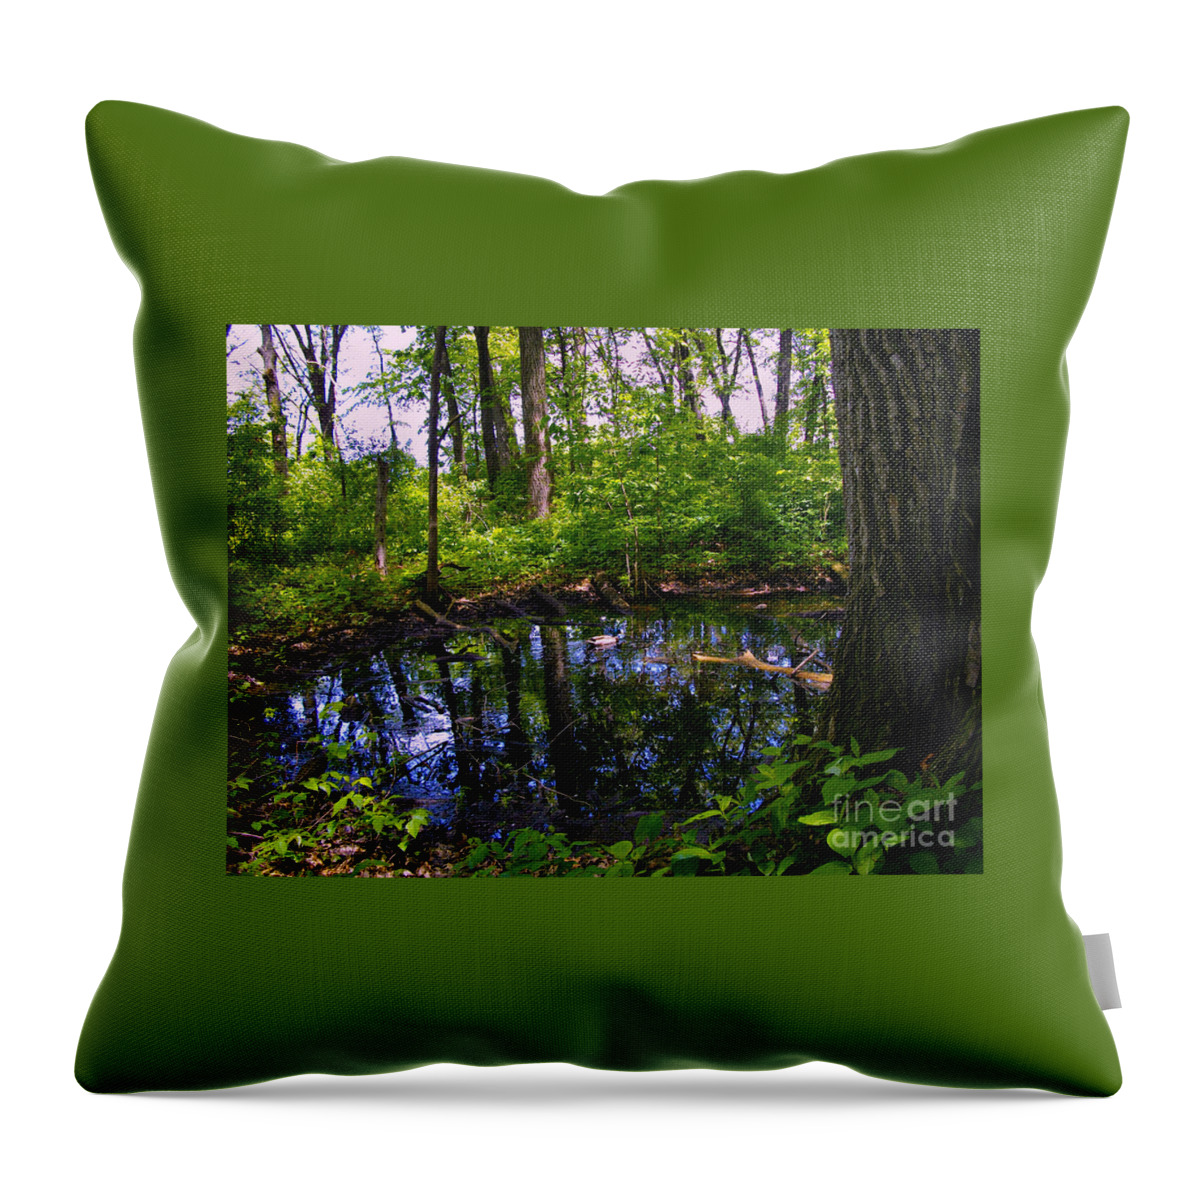 Ducks Throw Pillow featuring the photograph Ducks In The Water by Frank J Casella